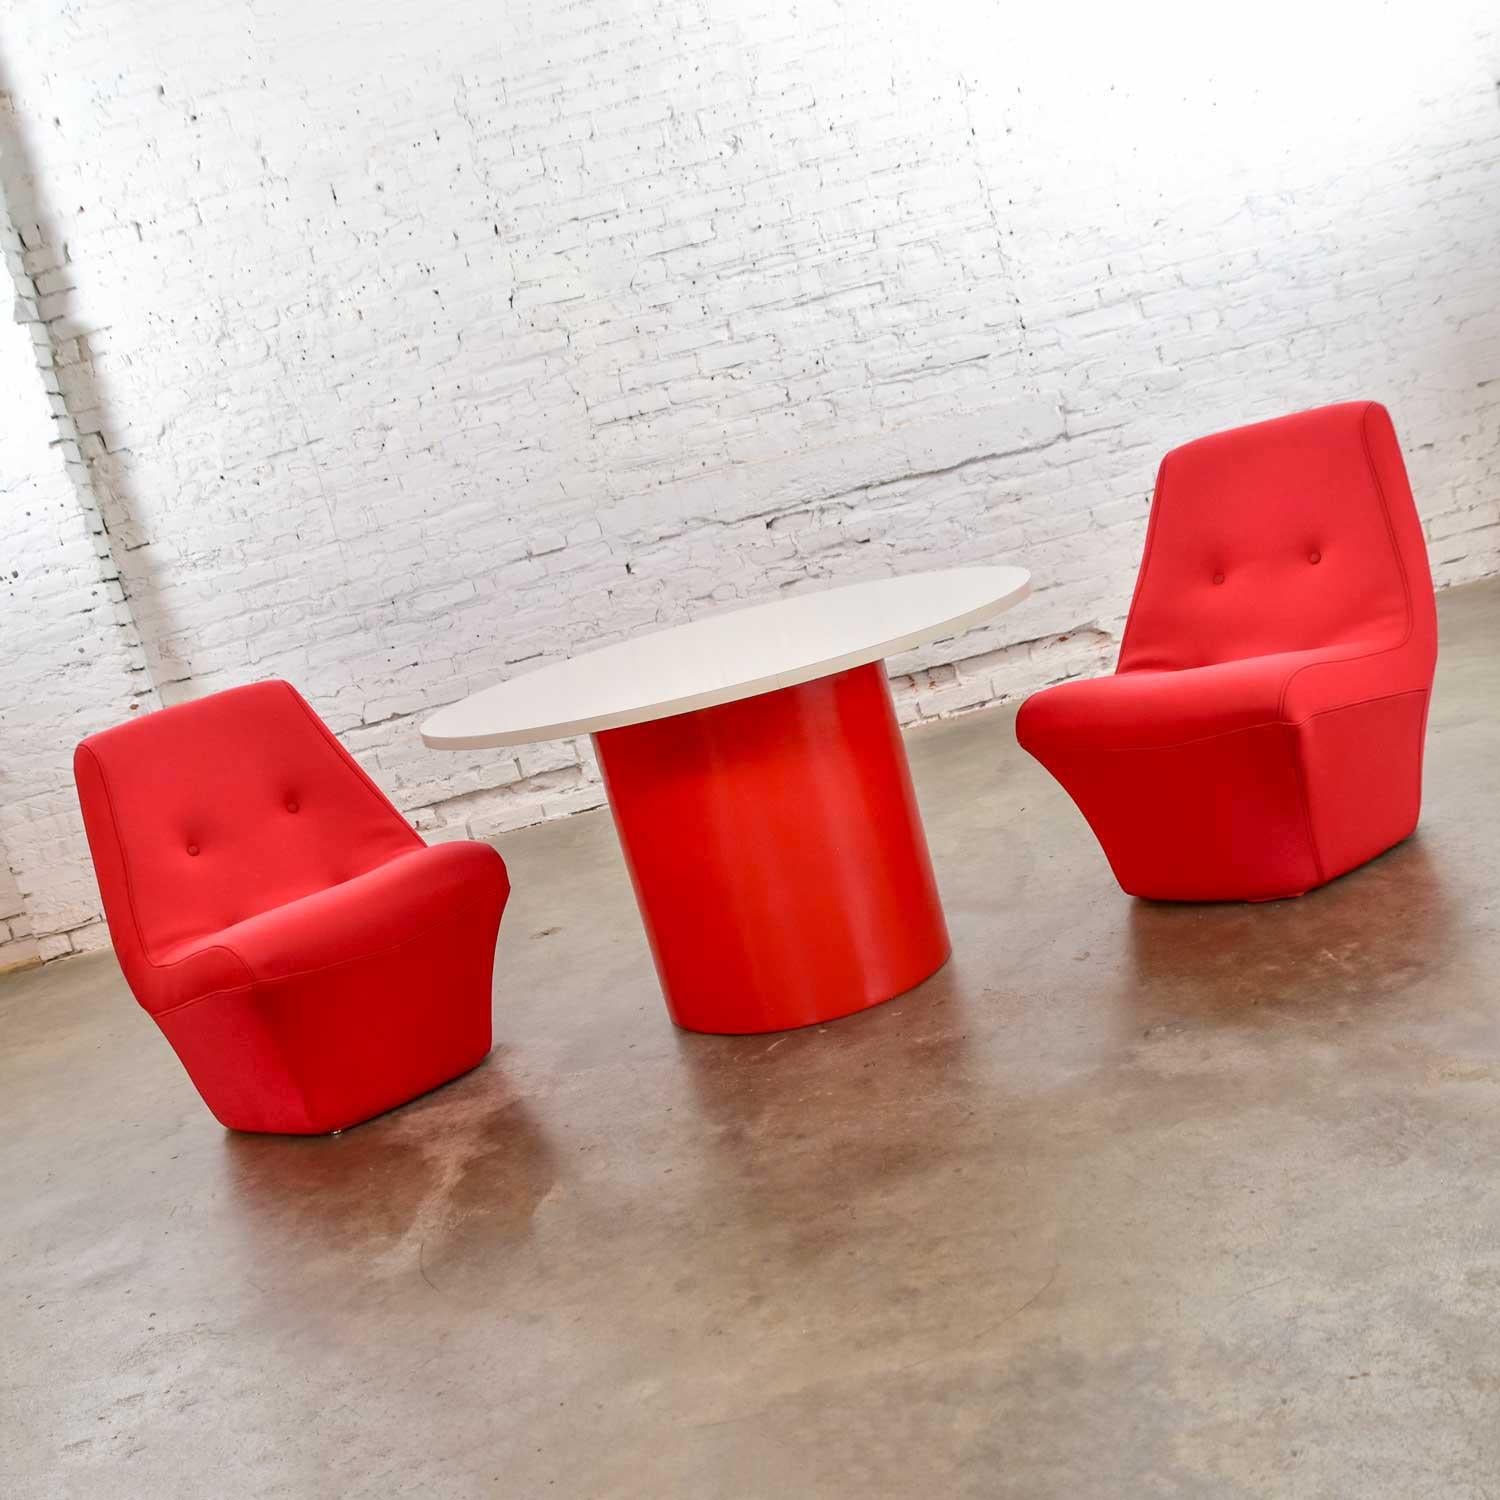 Fabulous mod style MCM (mid-century modern) 1967 dining or game table from the New Design Idiom line by Milo Baughman for Thayer Coggin comprised of red vinyl base and white laminate top table, and 2 slipper chairs by Founders Furniture. Chairs have